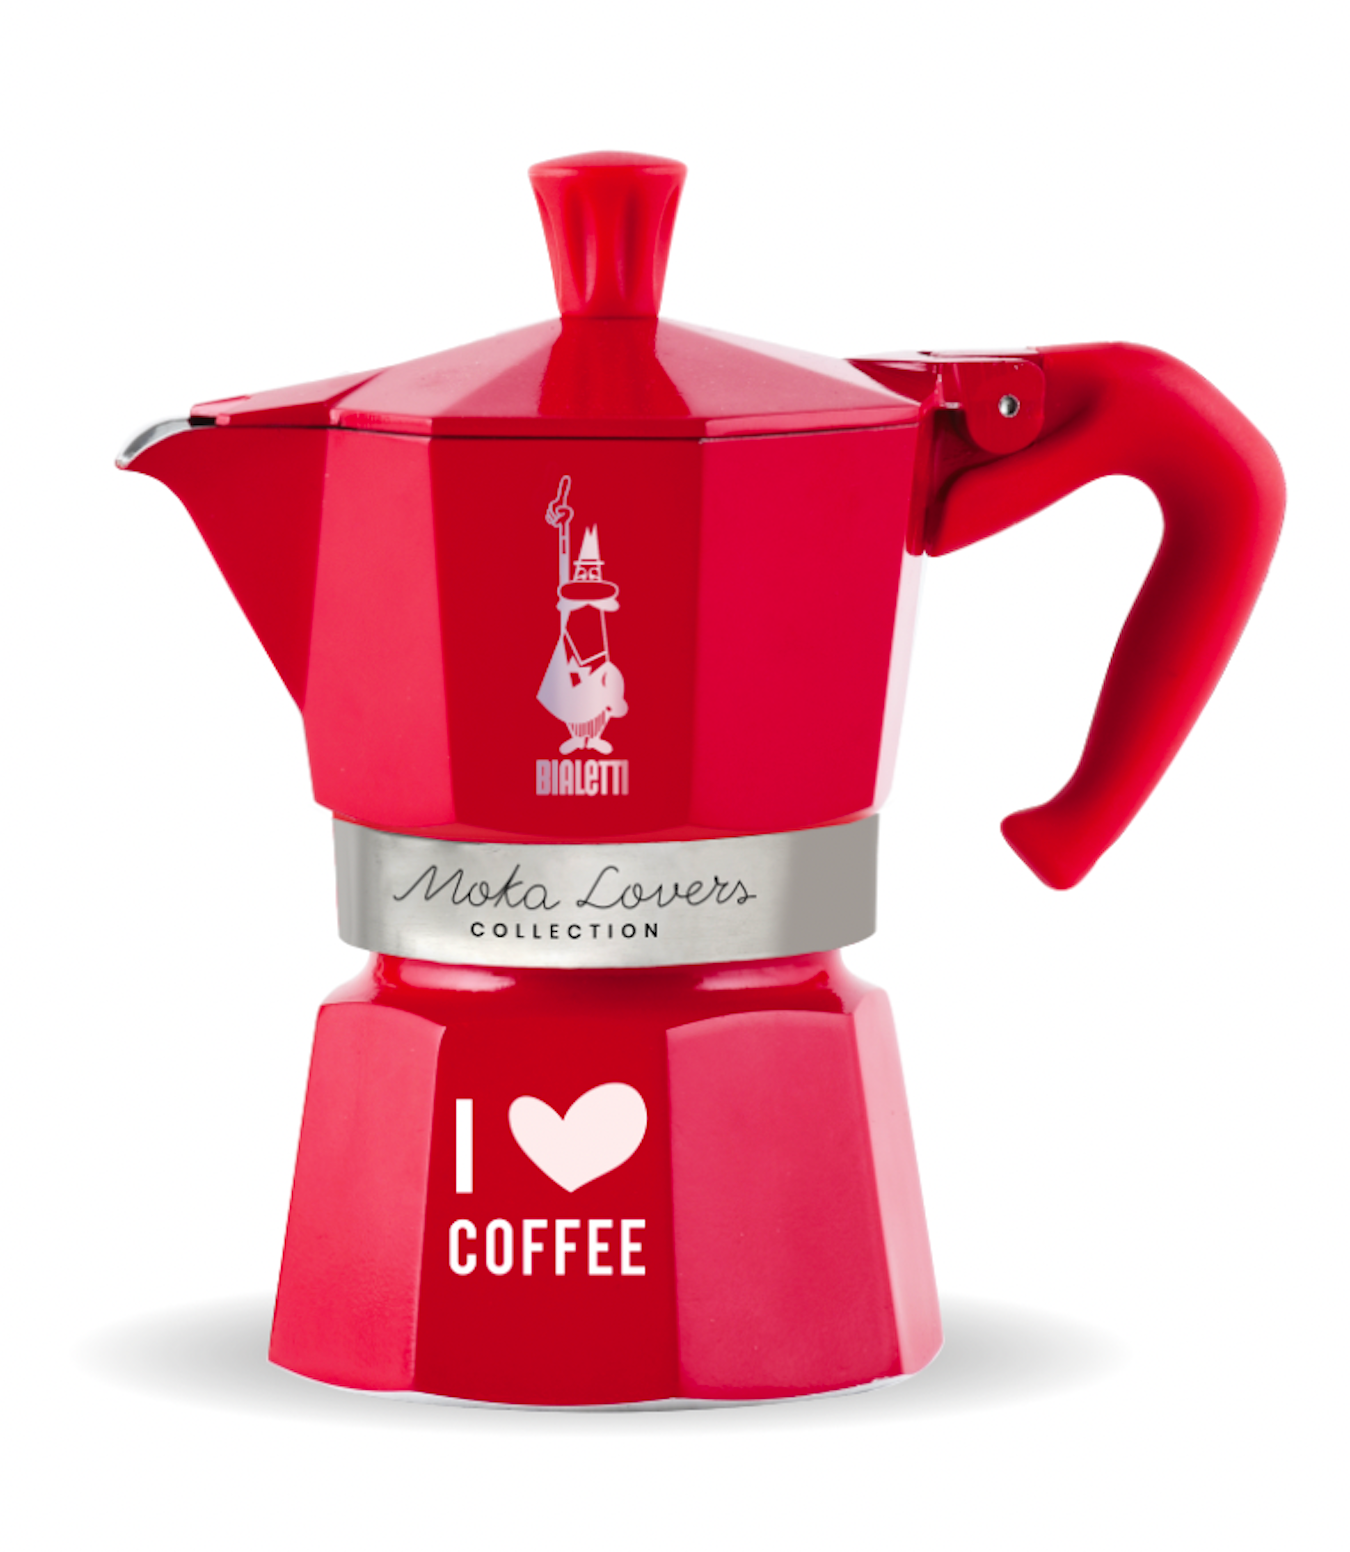 Bialetti Moka Lovers Collection Red